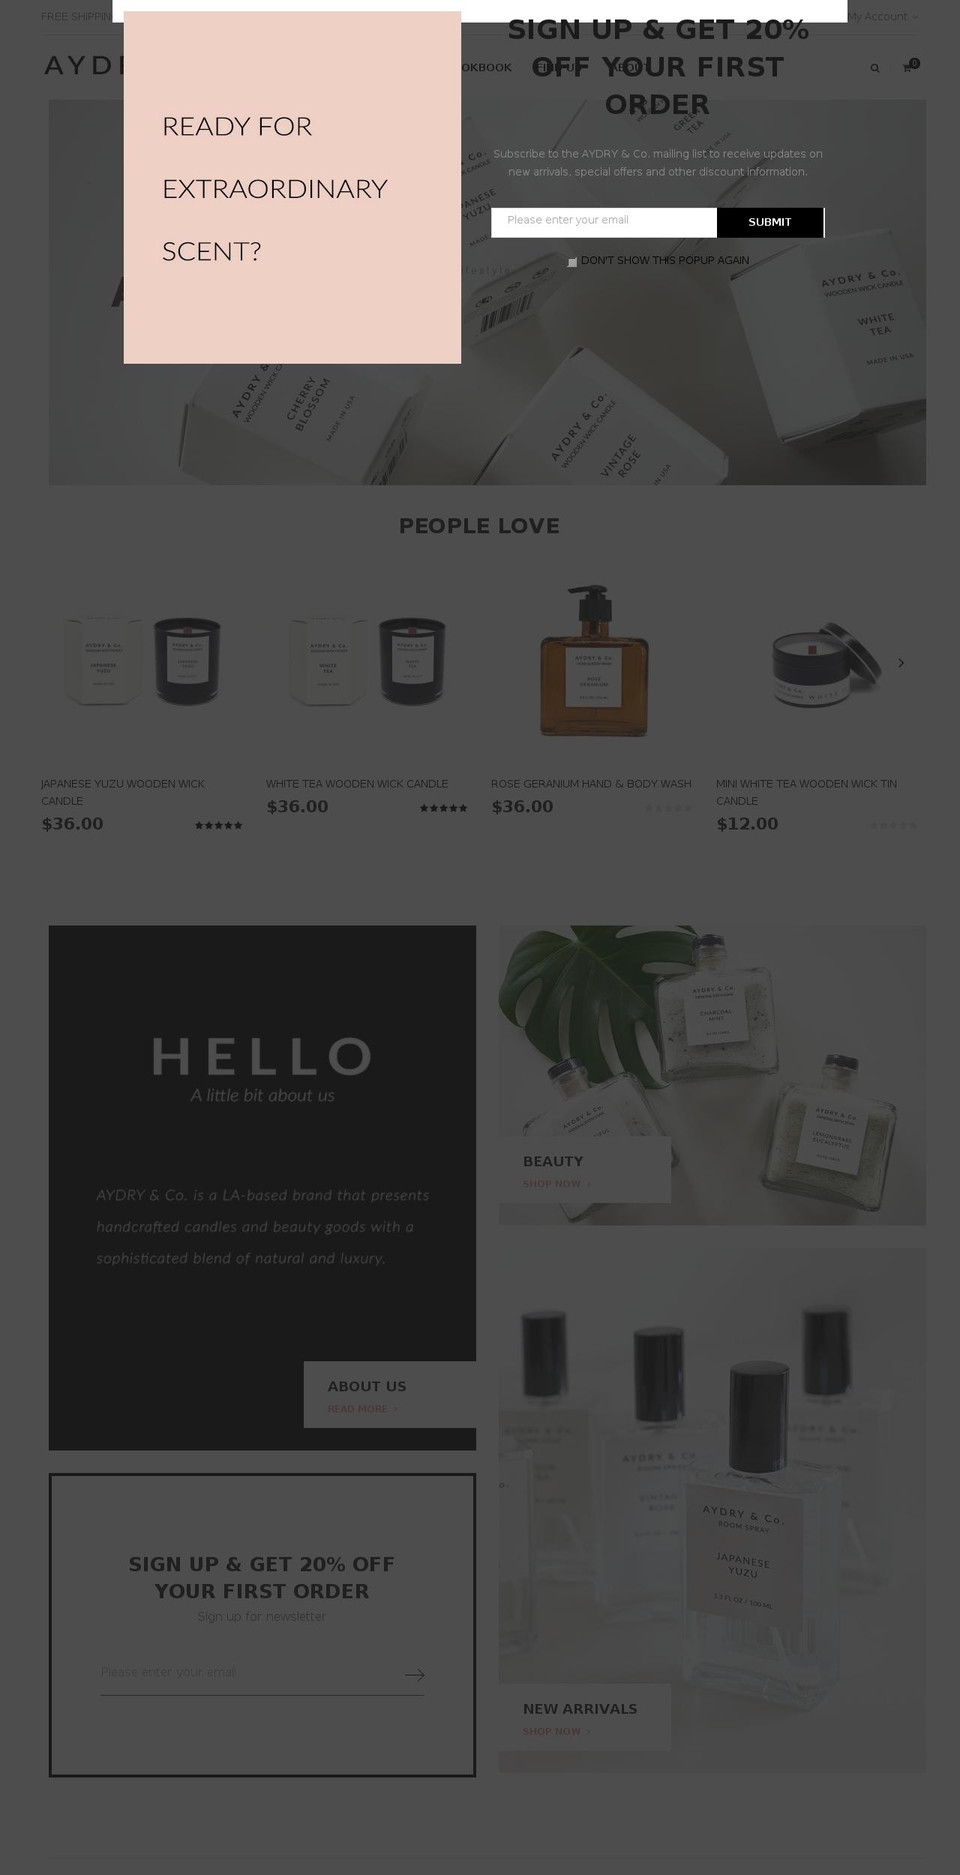 Bullet Shopify theme site example aydry.com